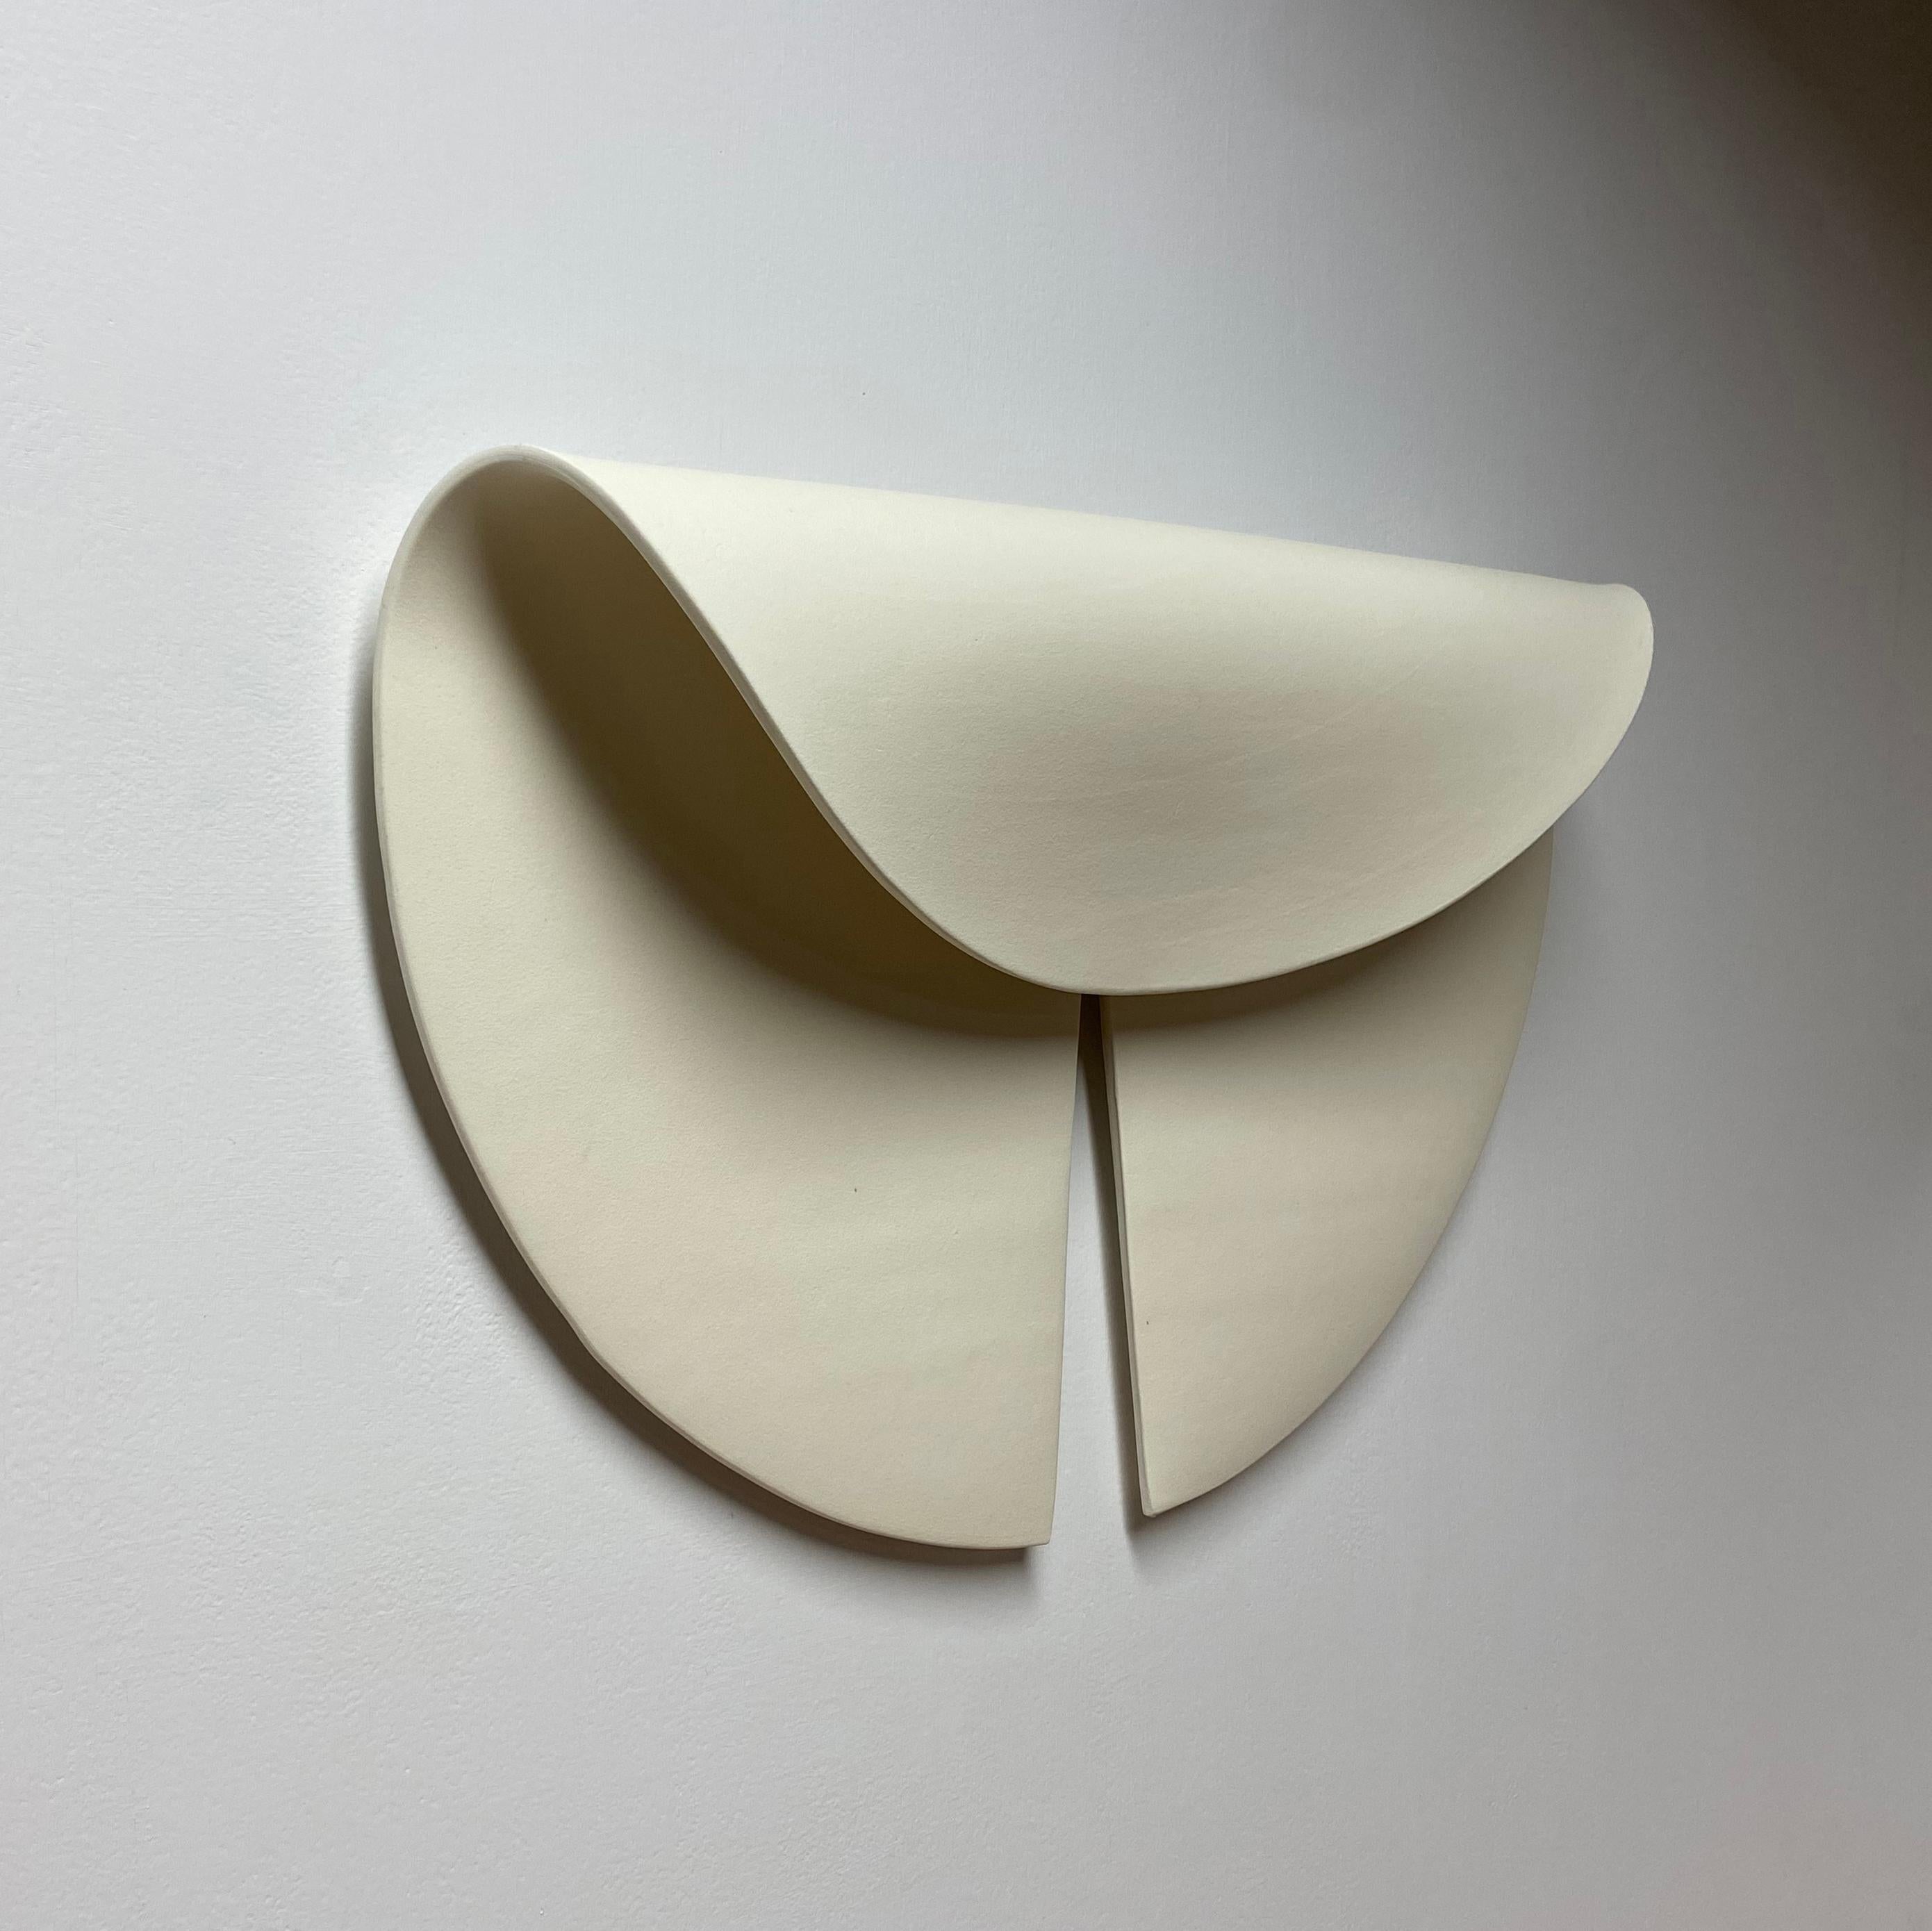 Contemporary Ceramic Wall Sculpture: 'Leaf' PAIR OF TWO / By Olivia Barry For Sale